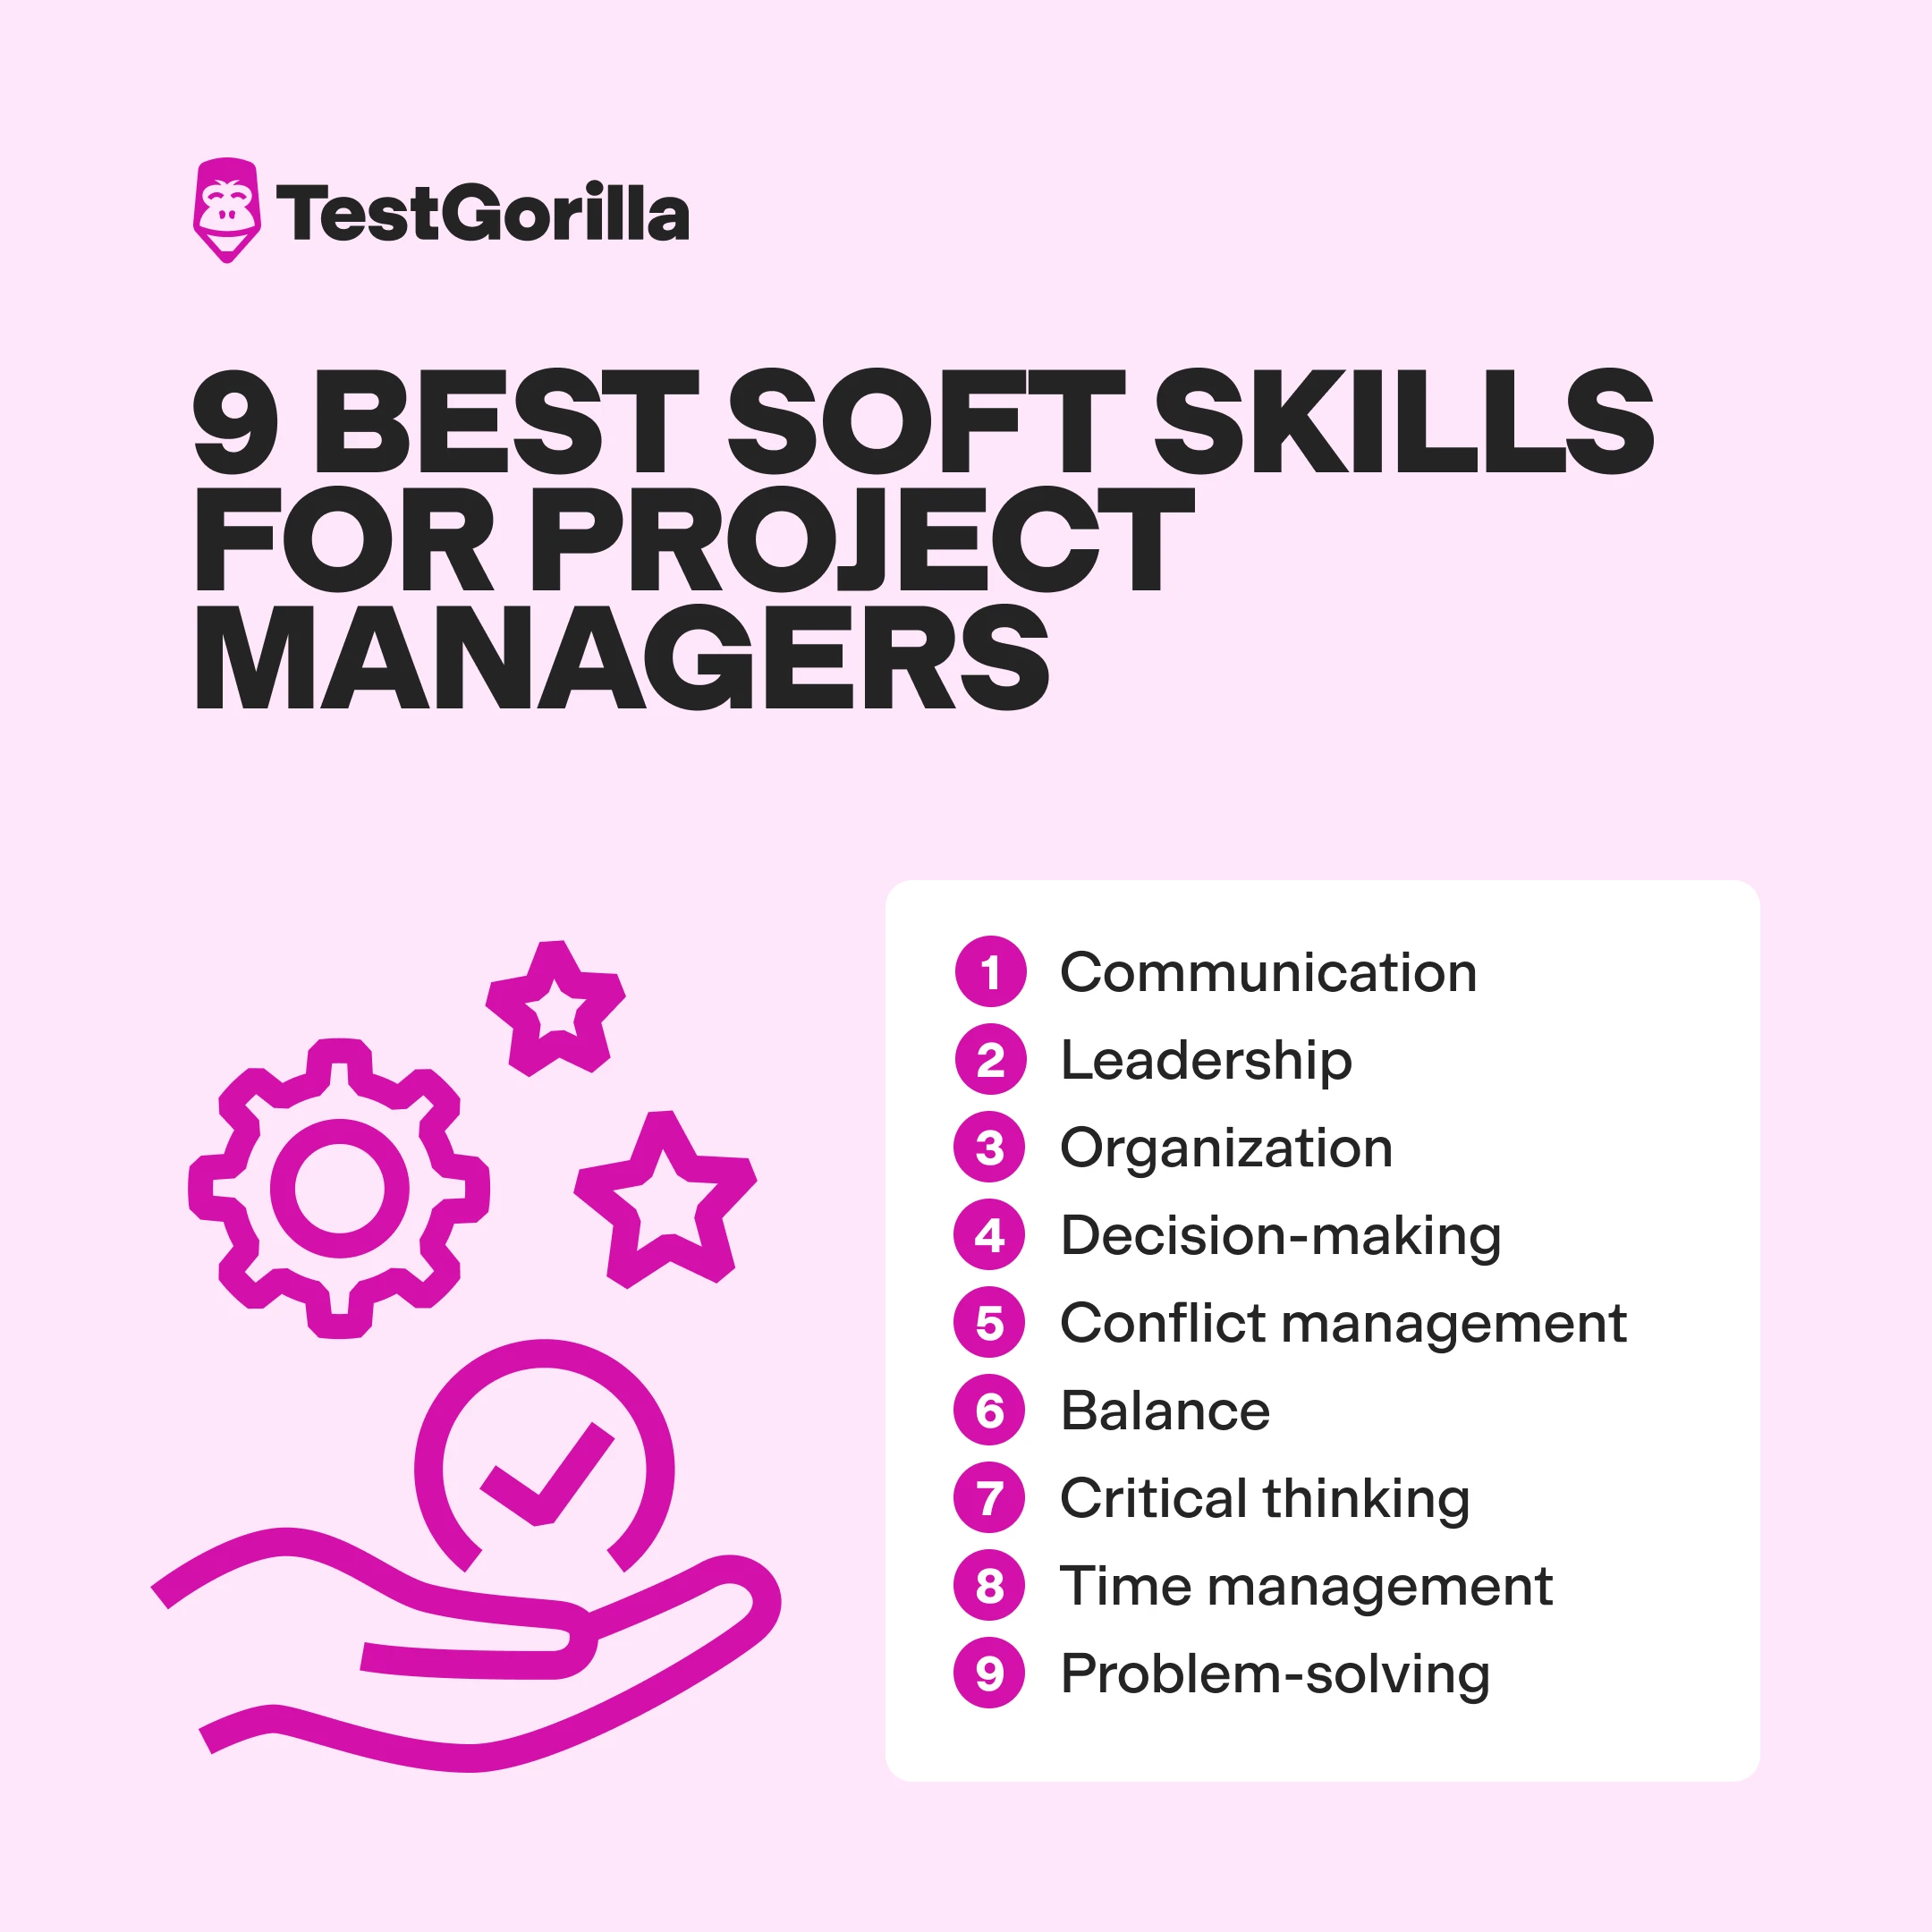 9 best soft skills for project managers